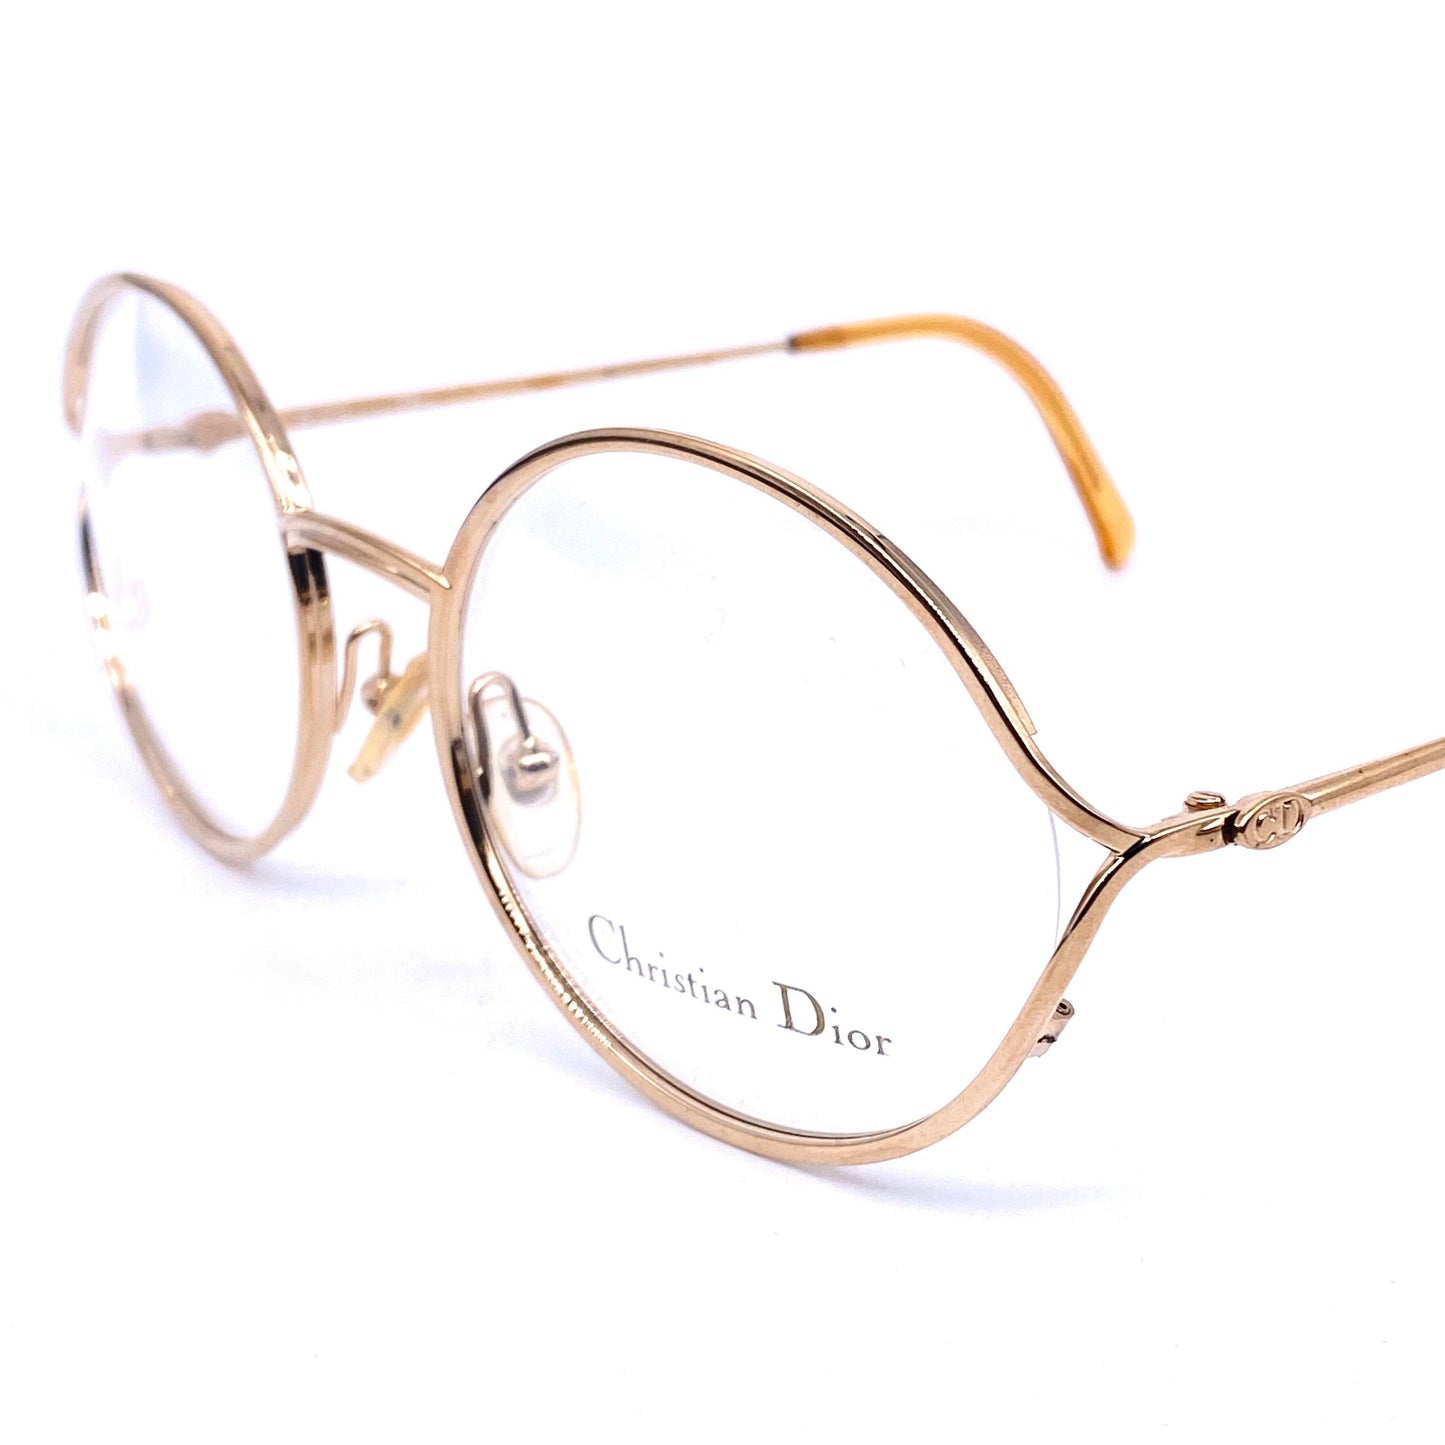 Christian Dior 3500 round oversized eyeglasses frames, coming in yellow or pink gold, no’s 80s Austria